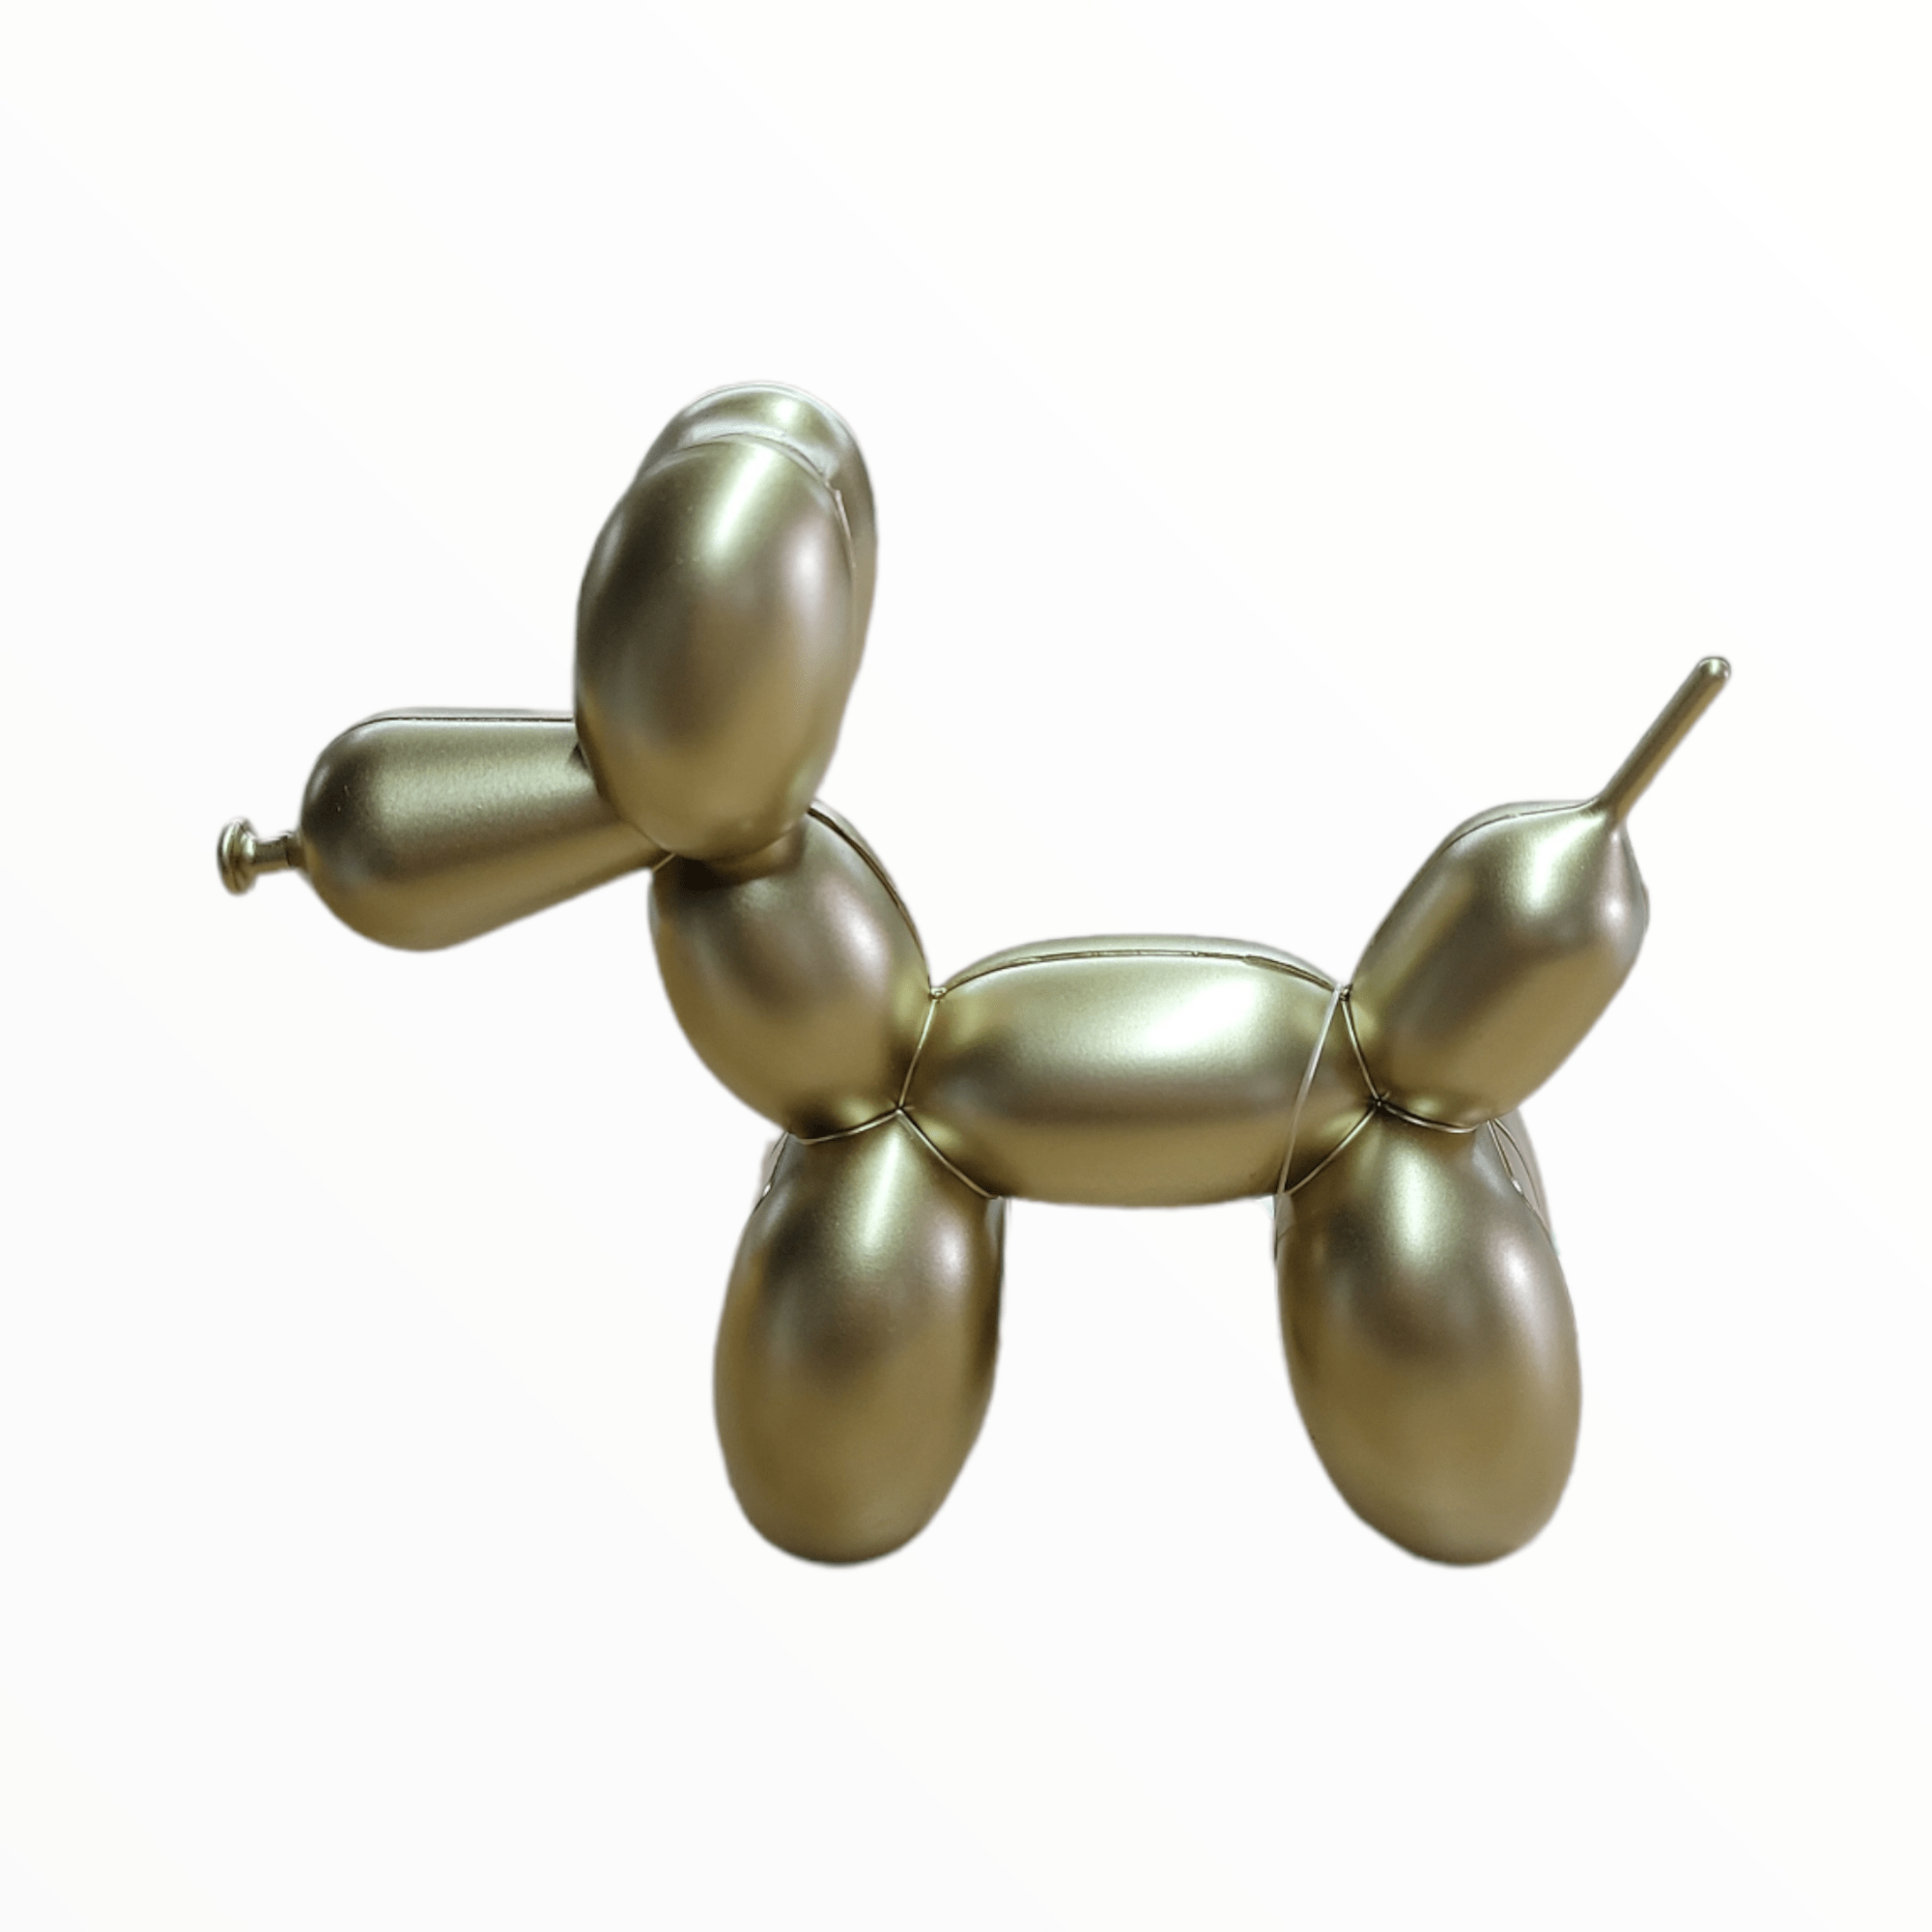 Unique Industries BALLOONS Metallic Gold Dog Shaped Balloon Weight